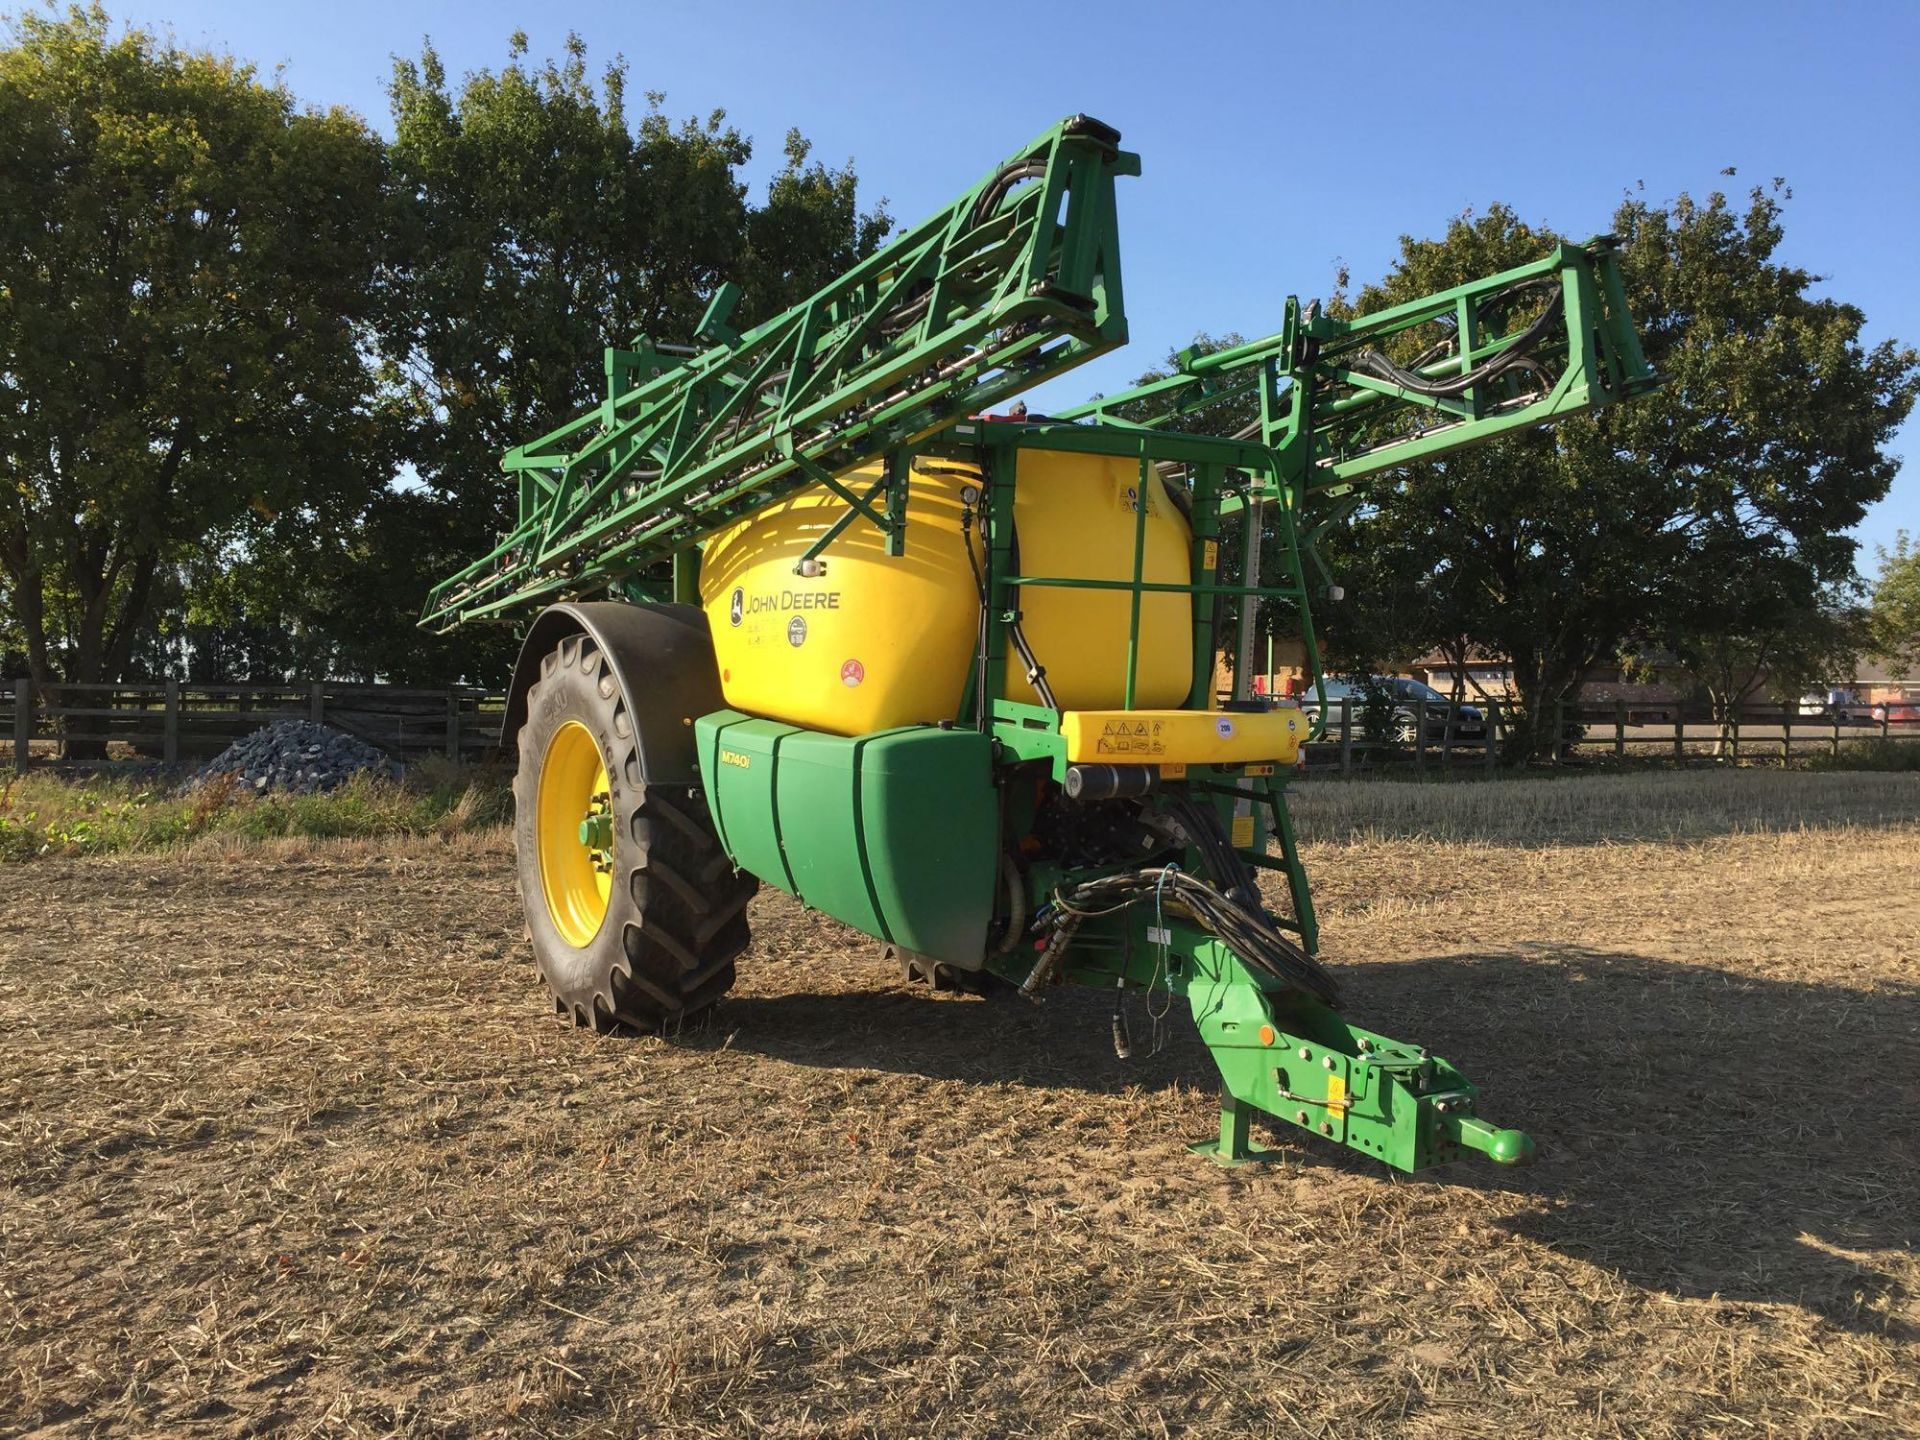 2017 John Deere M740i 24m trailed sprayer, 4000l tank on 520/85R38 wheels and tyres. Hectares: c.12,